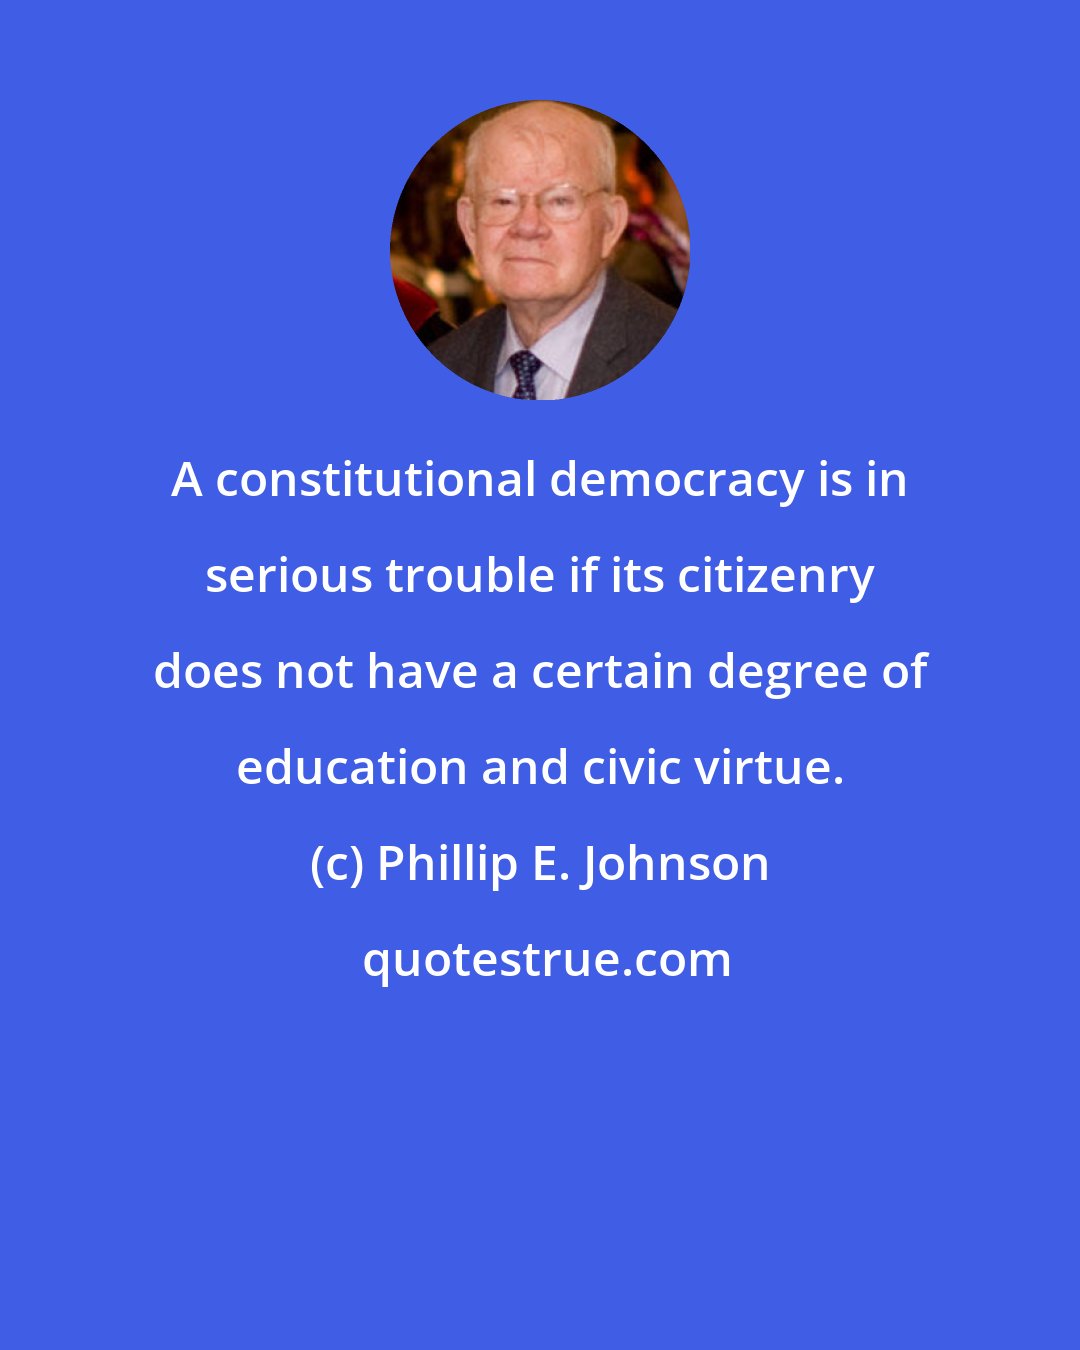 Phillip E. Johnson: A constitutional democracy is in serious trouble if its citizenry does not have a certain degree of education and civic virtue.